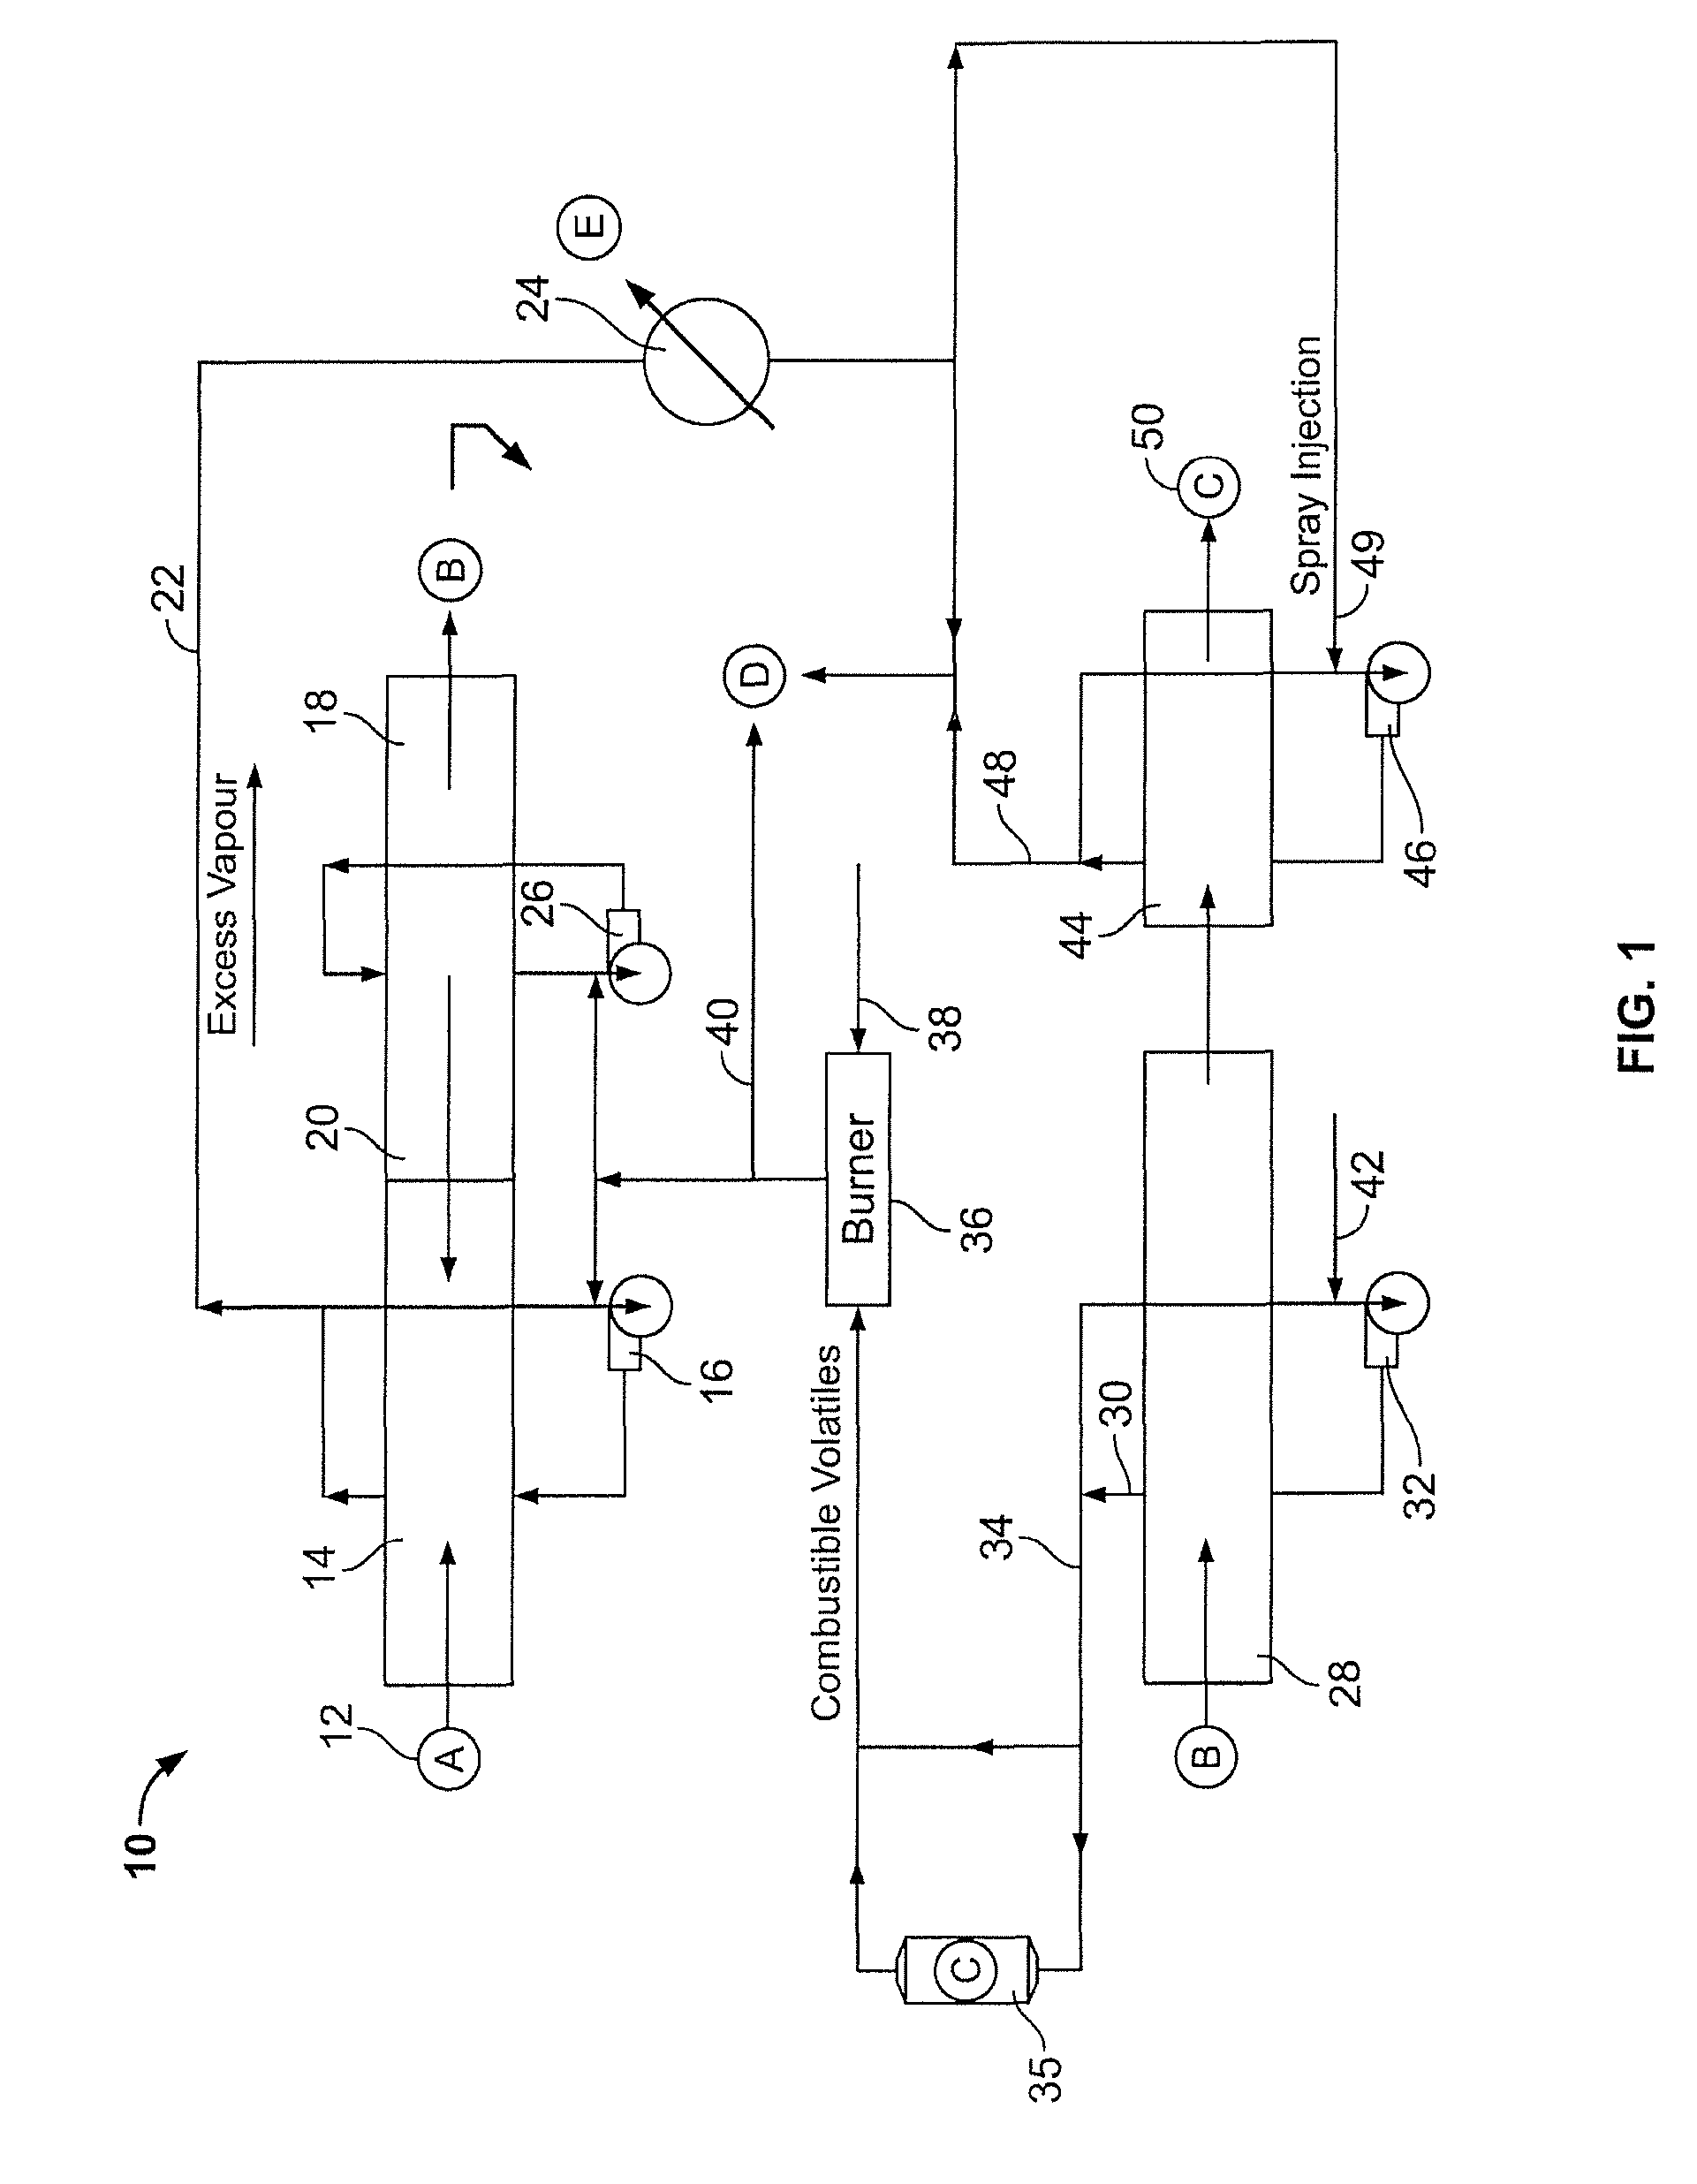 Method of converting pyrolyzable organic materials to biocarbon